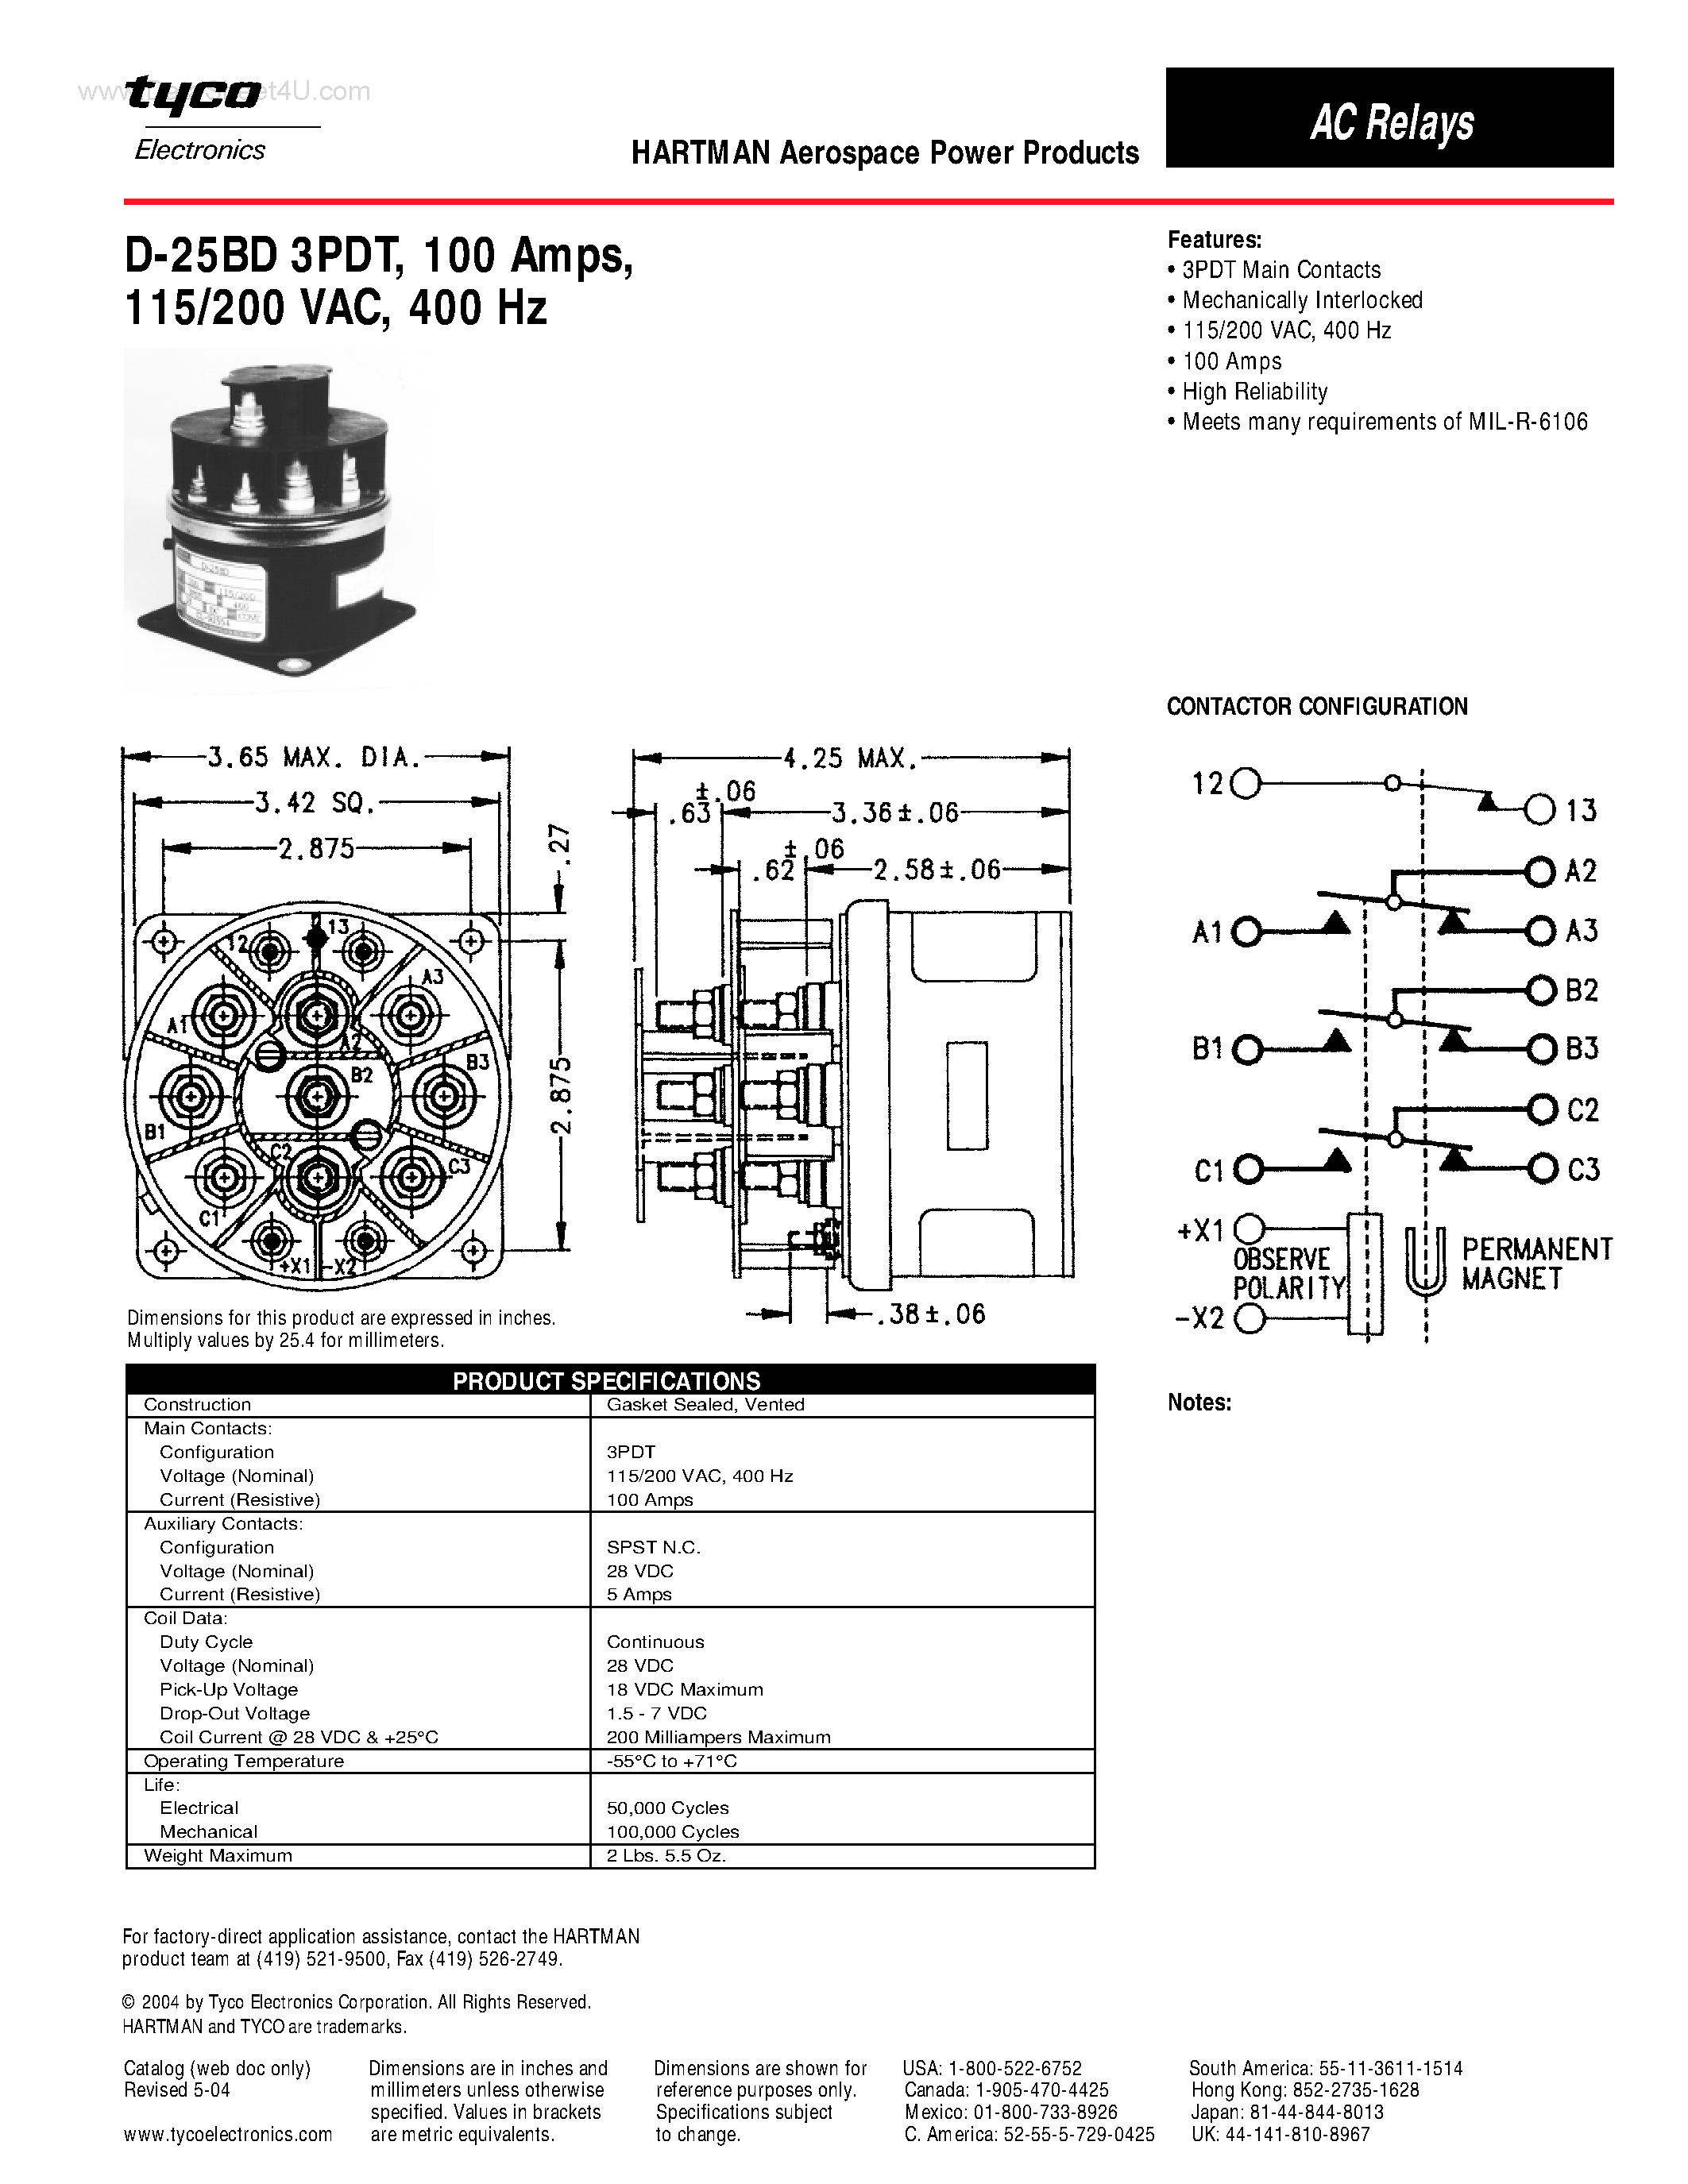 Datasheet D-25BD - 100 Amps page 1